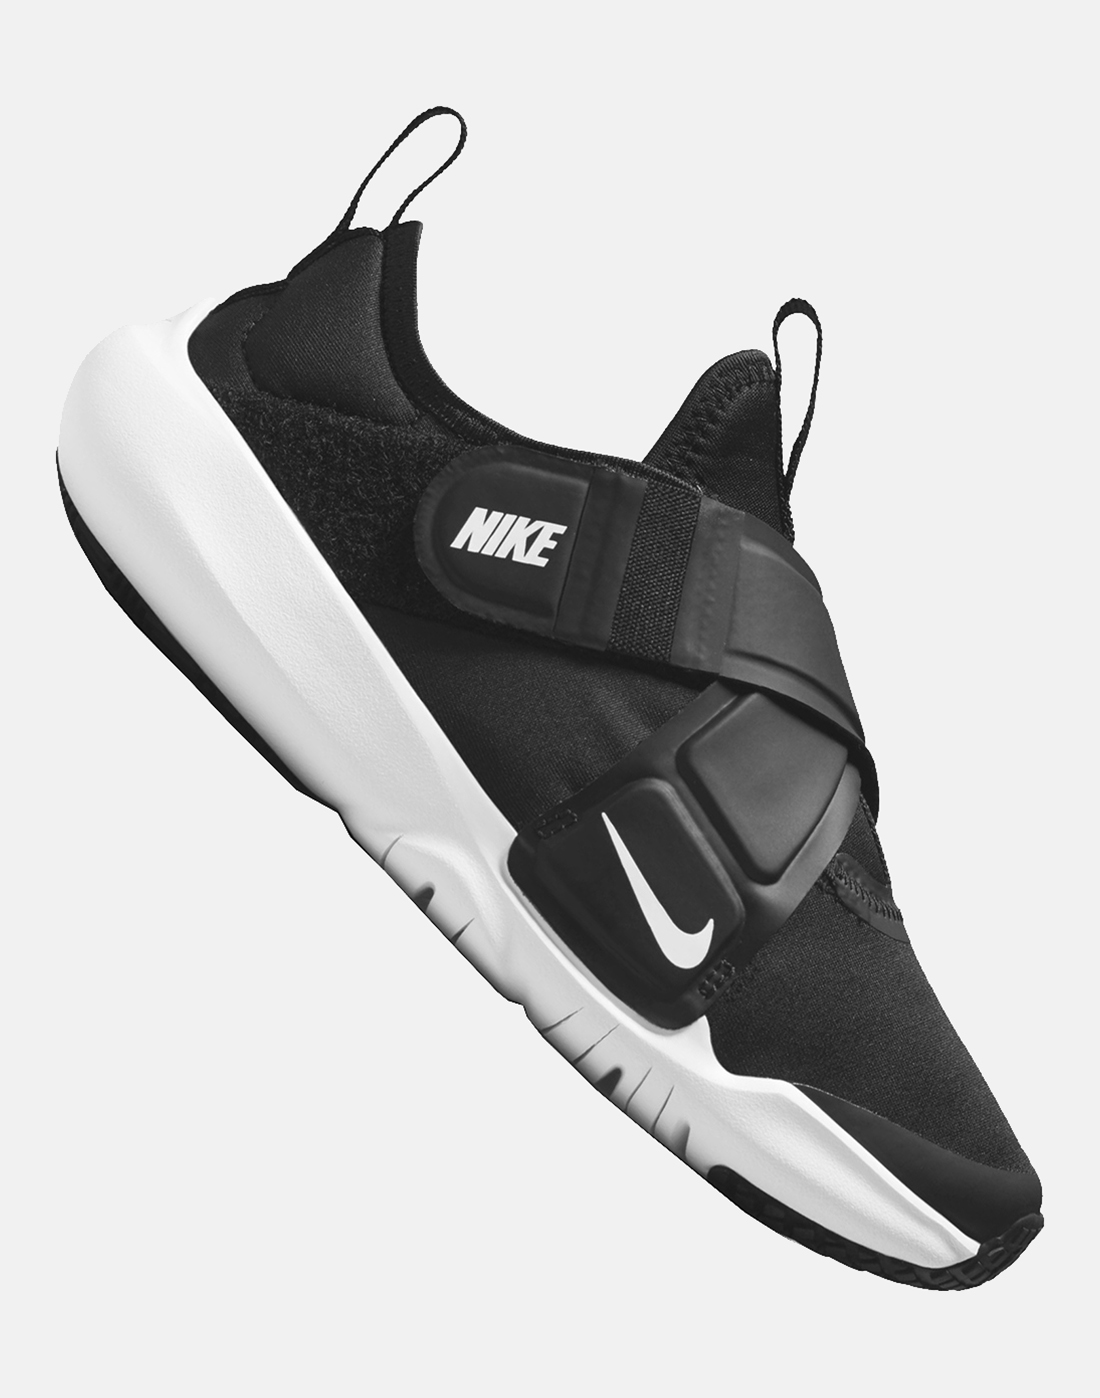 Nike Younger Kids Flex Advance Flyease - Black | Life Style Sports IE